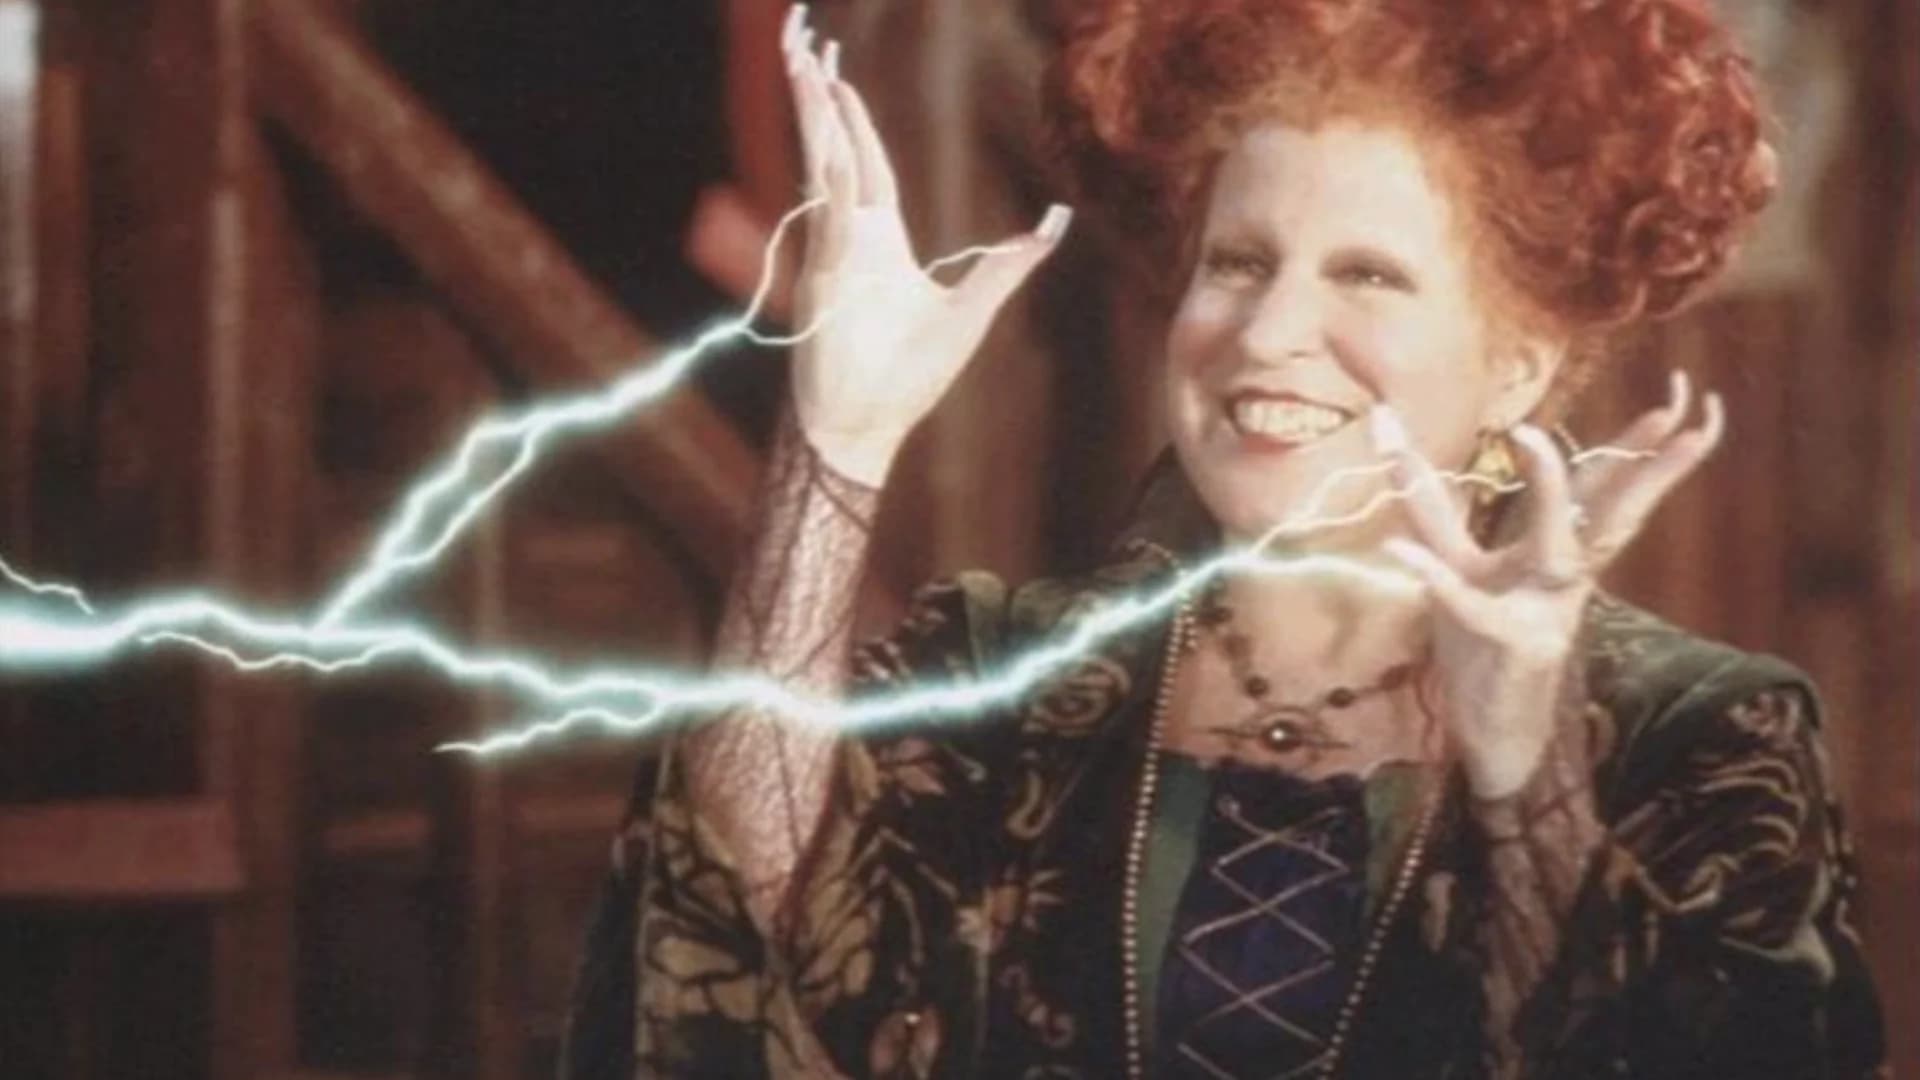 Sanderson sisters from 'Hocus Pocus' to reunite for a magical night of ‘Hulaween’ 